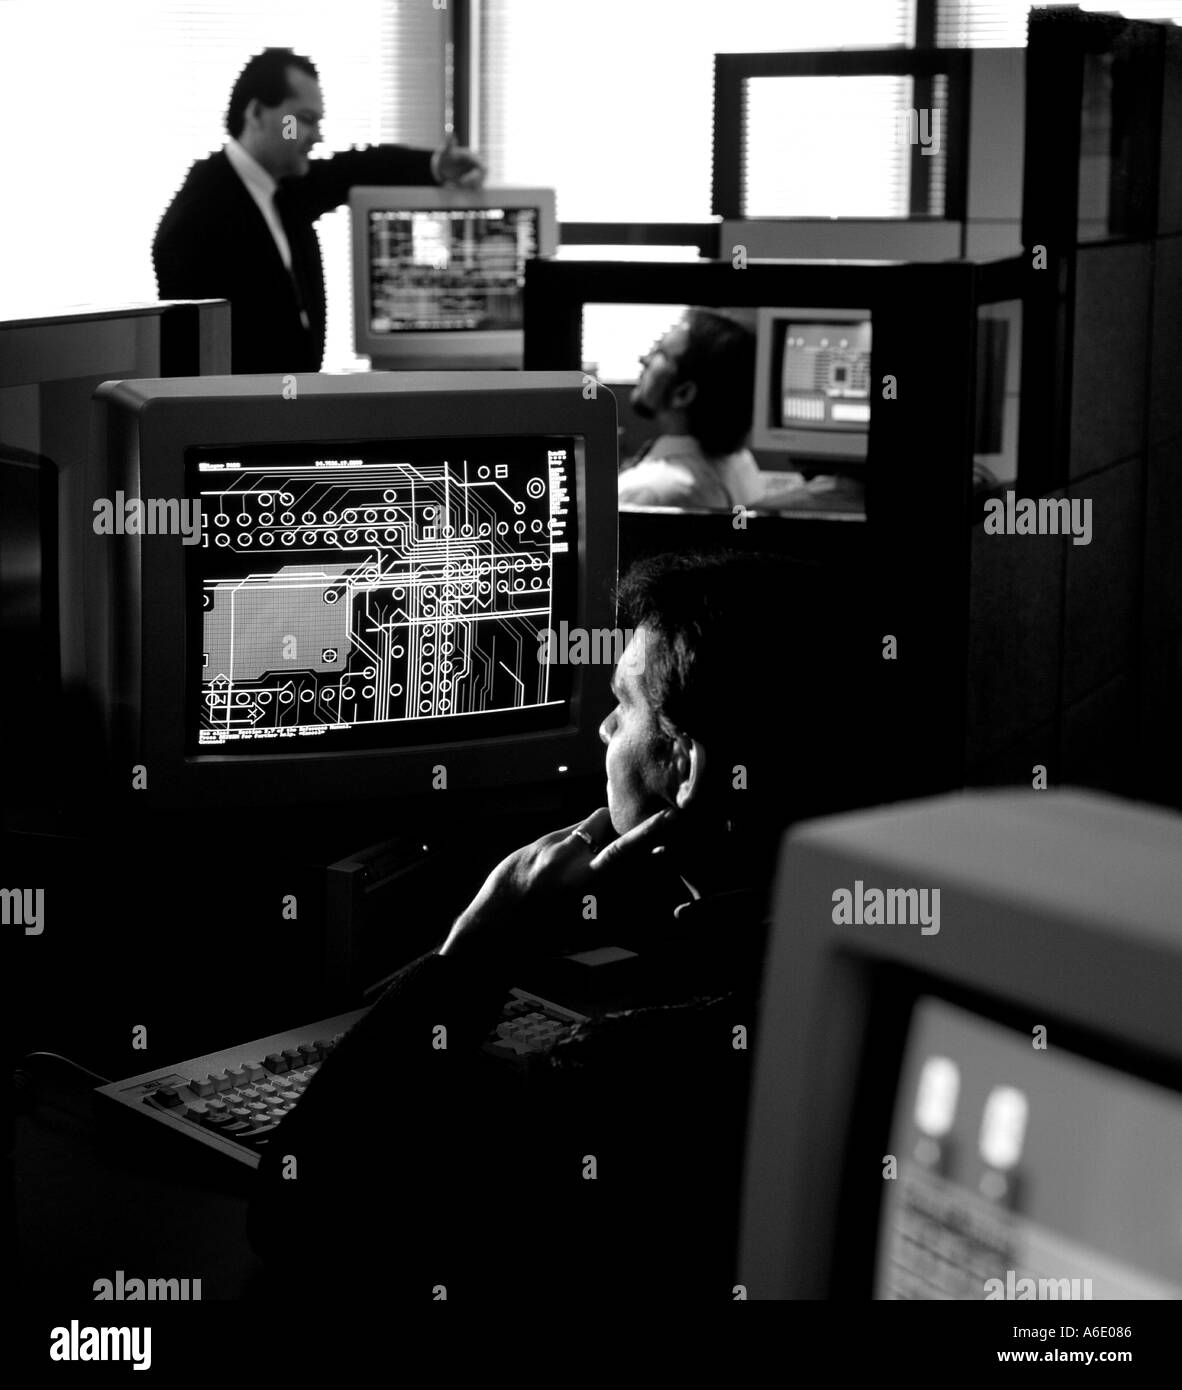 CAD operator looking at computer screen evaluating schematic in multi system office environment Stock Photo